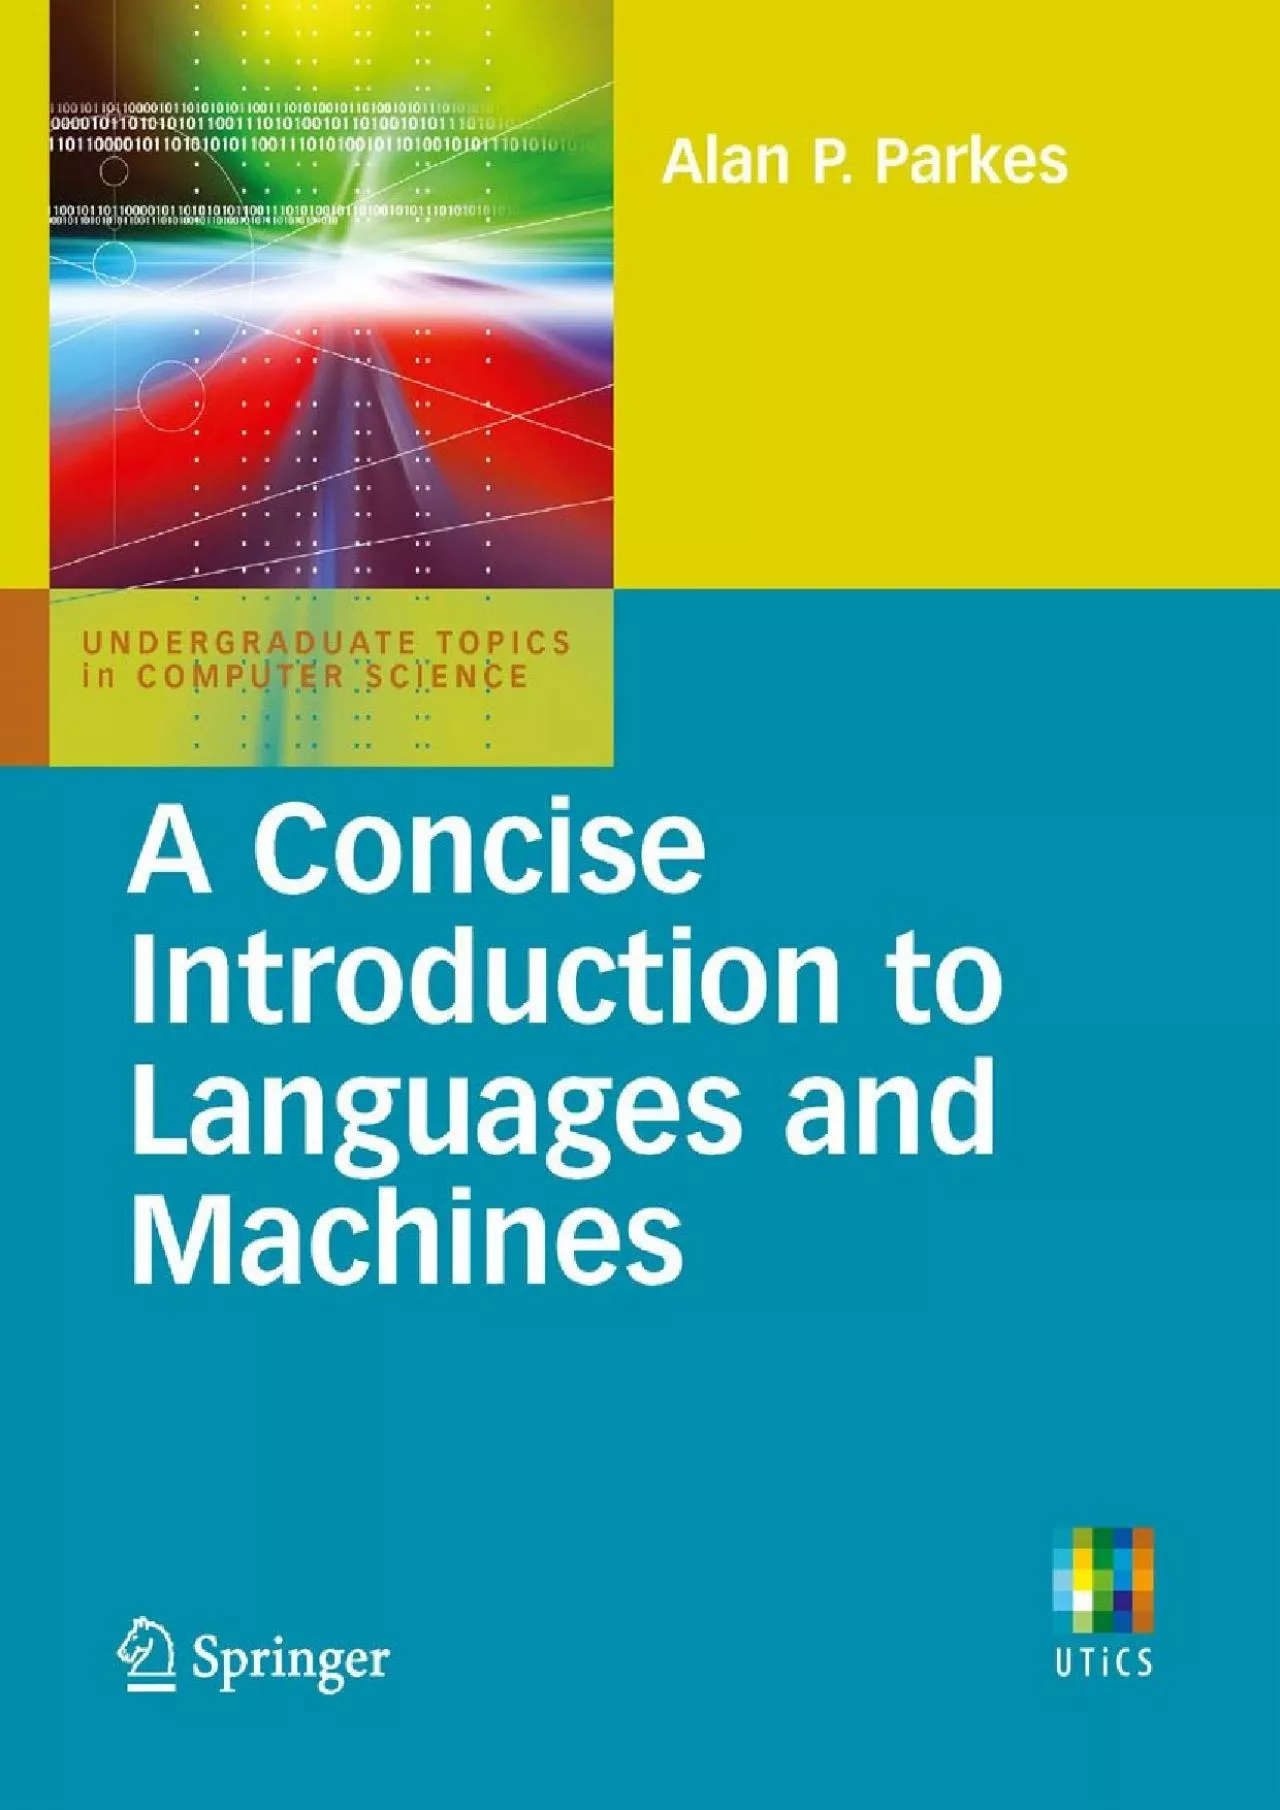 [FREE]-A Concise Introduction to Languages and Machines (Undergraduate Topics in Computer